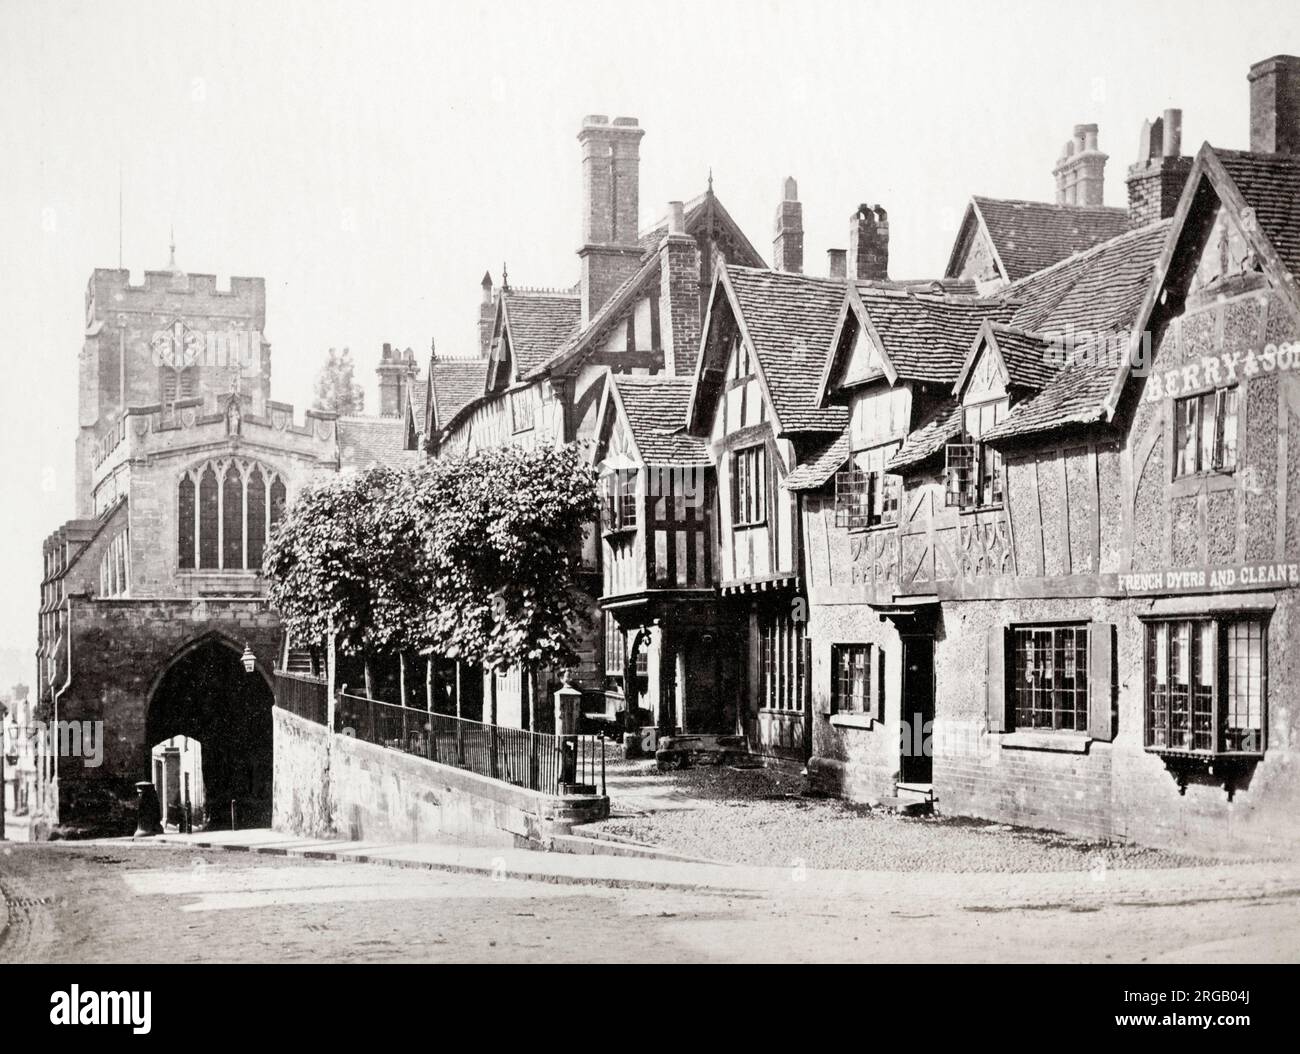 19th century vintage photograph: The Lord Leycester Hospital, West Gate, Warwick, England, c.1880's. Stock Photo